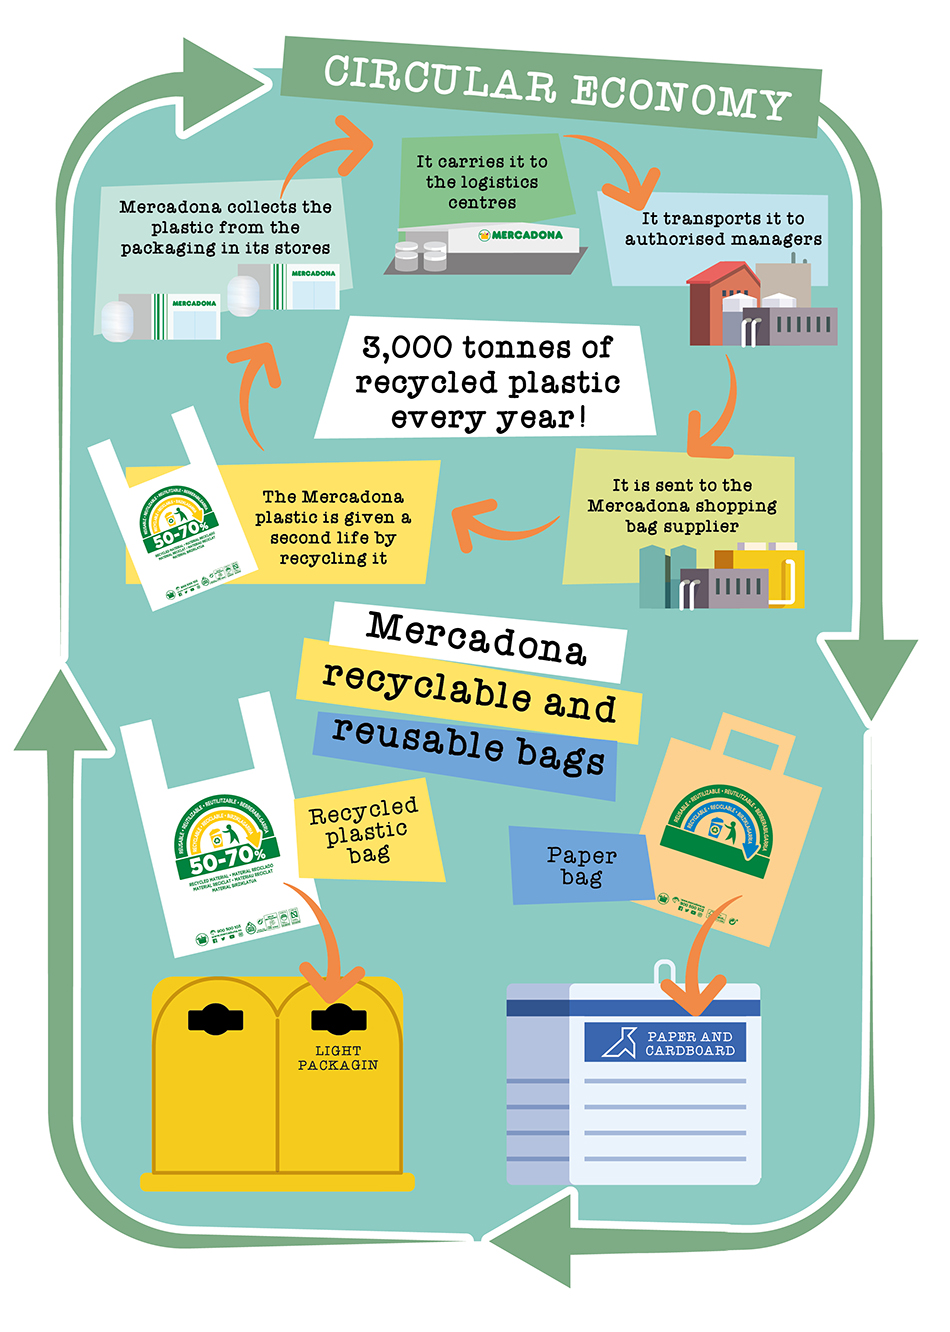 Reuse and recycling of Mercadona shopping bags